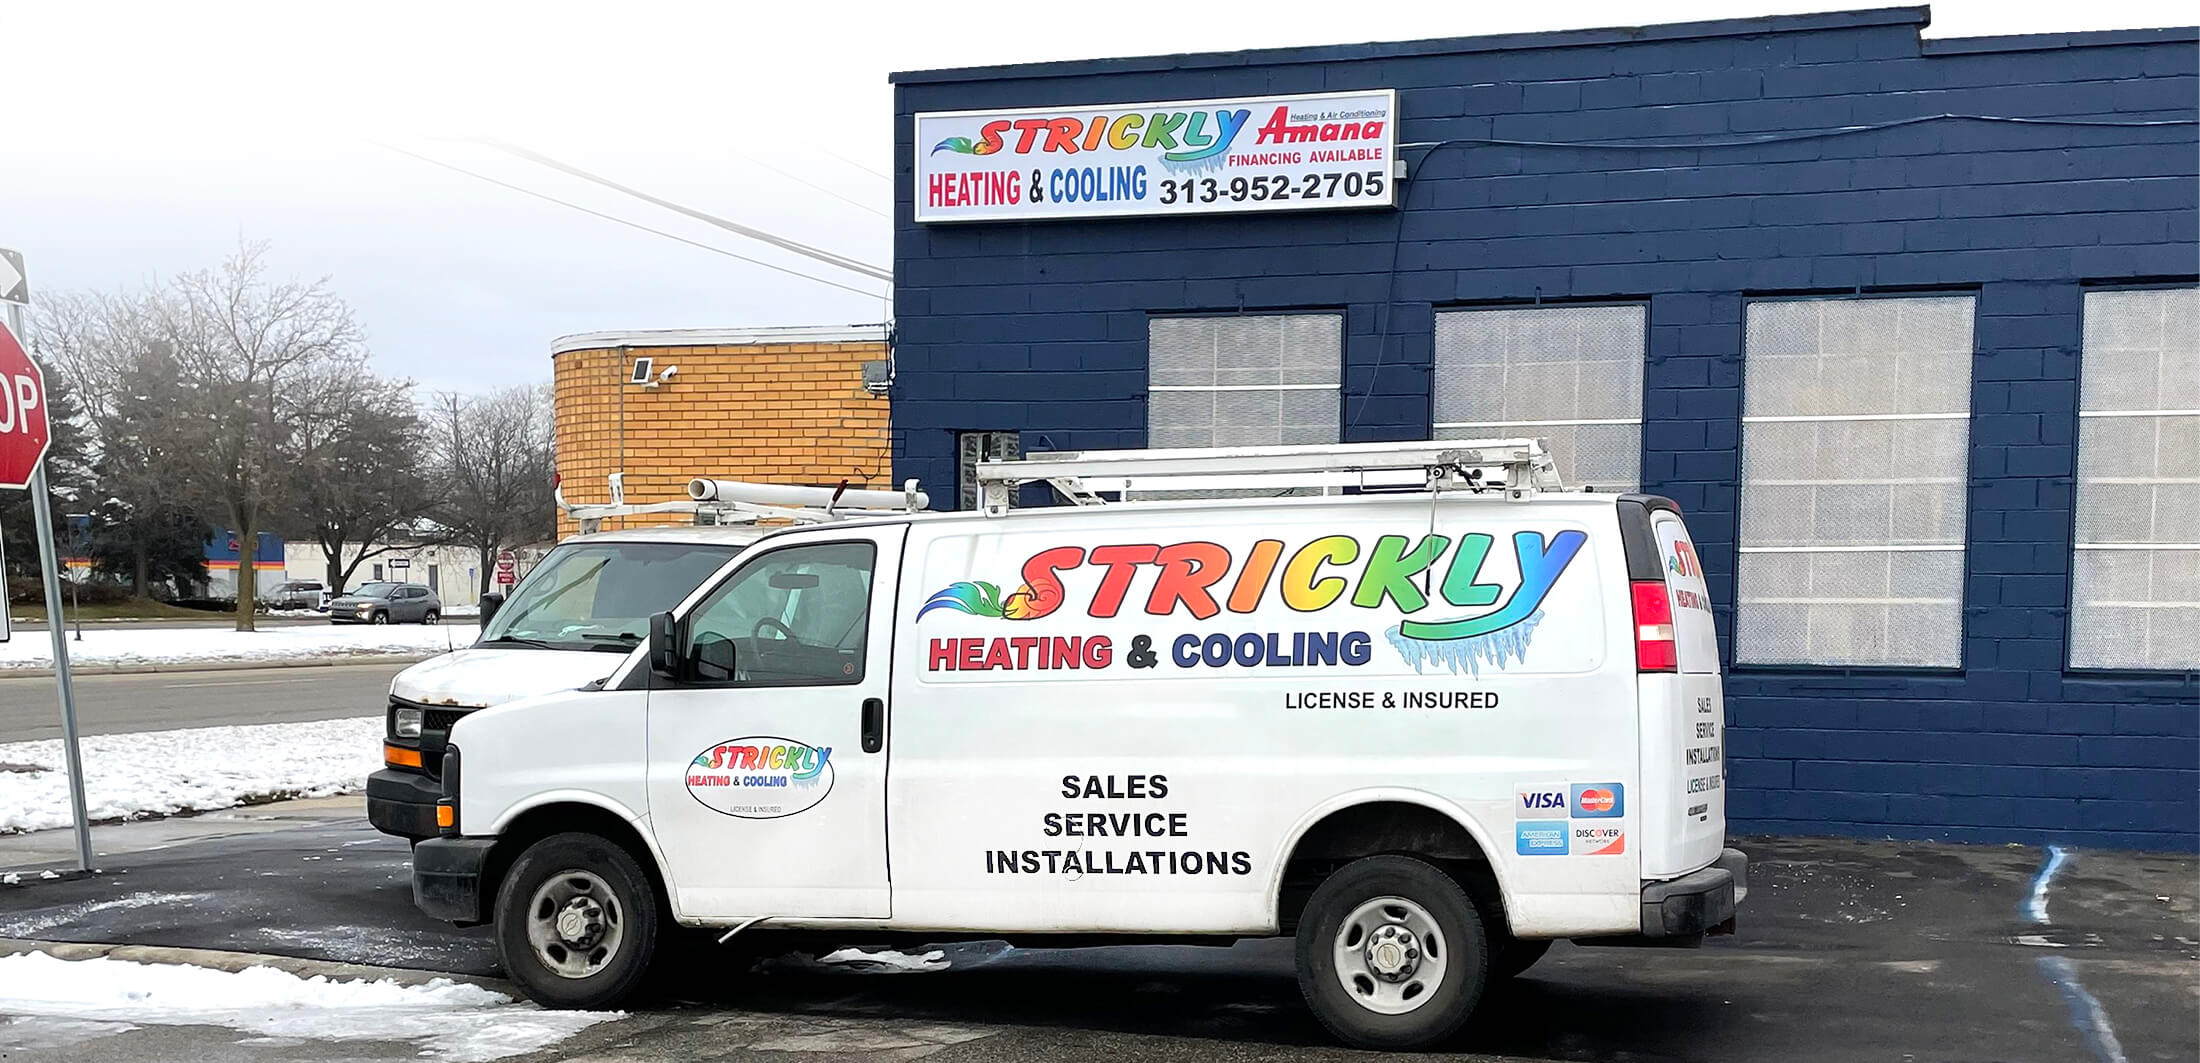 Trust our techs with your next Boiler repair in Redford MI